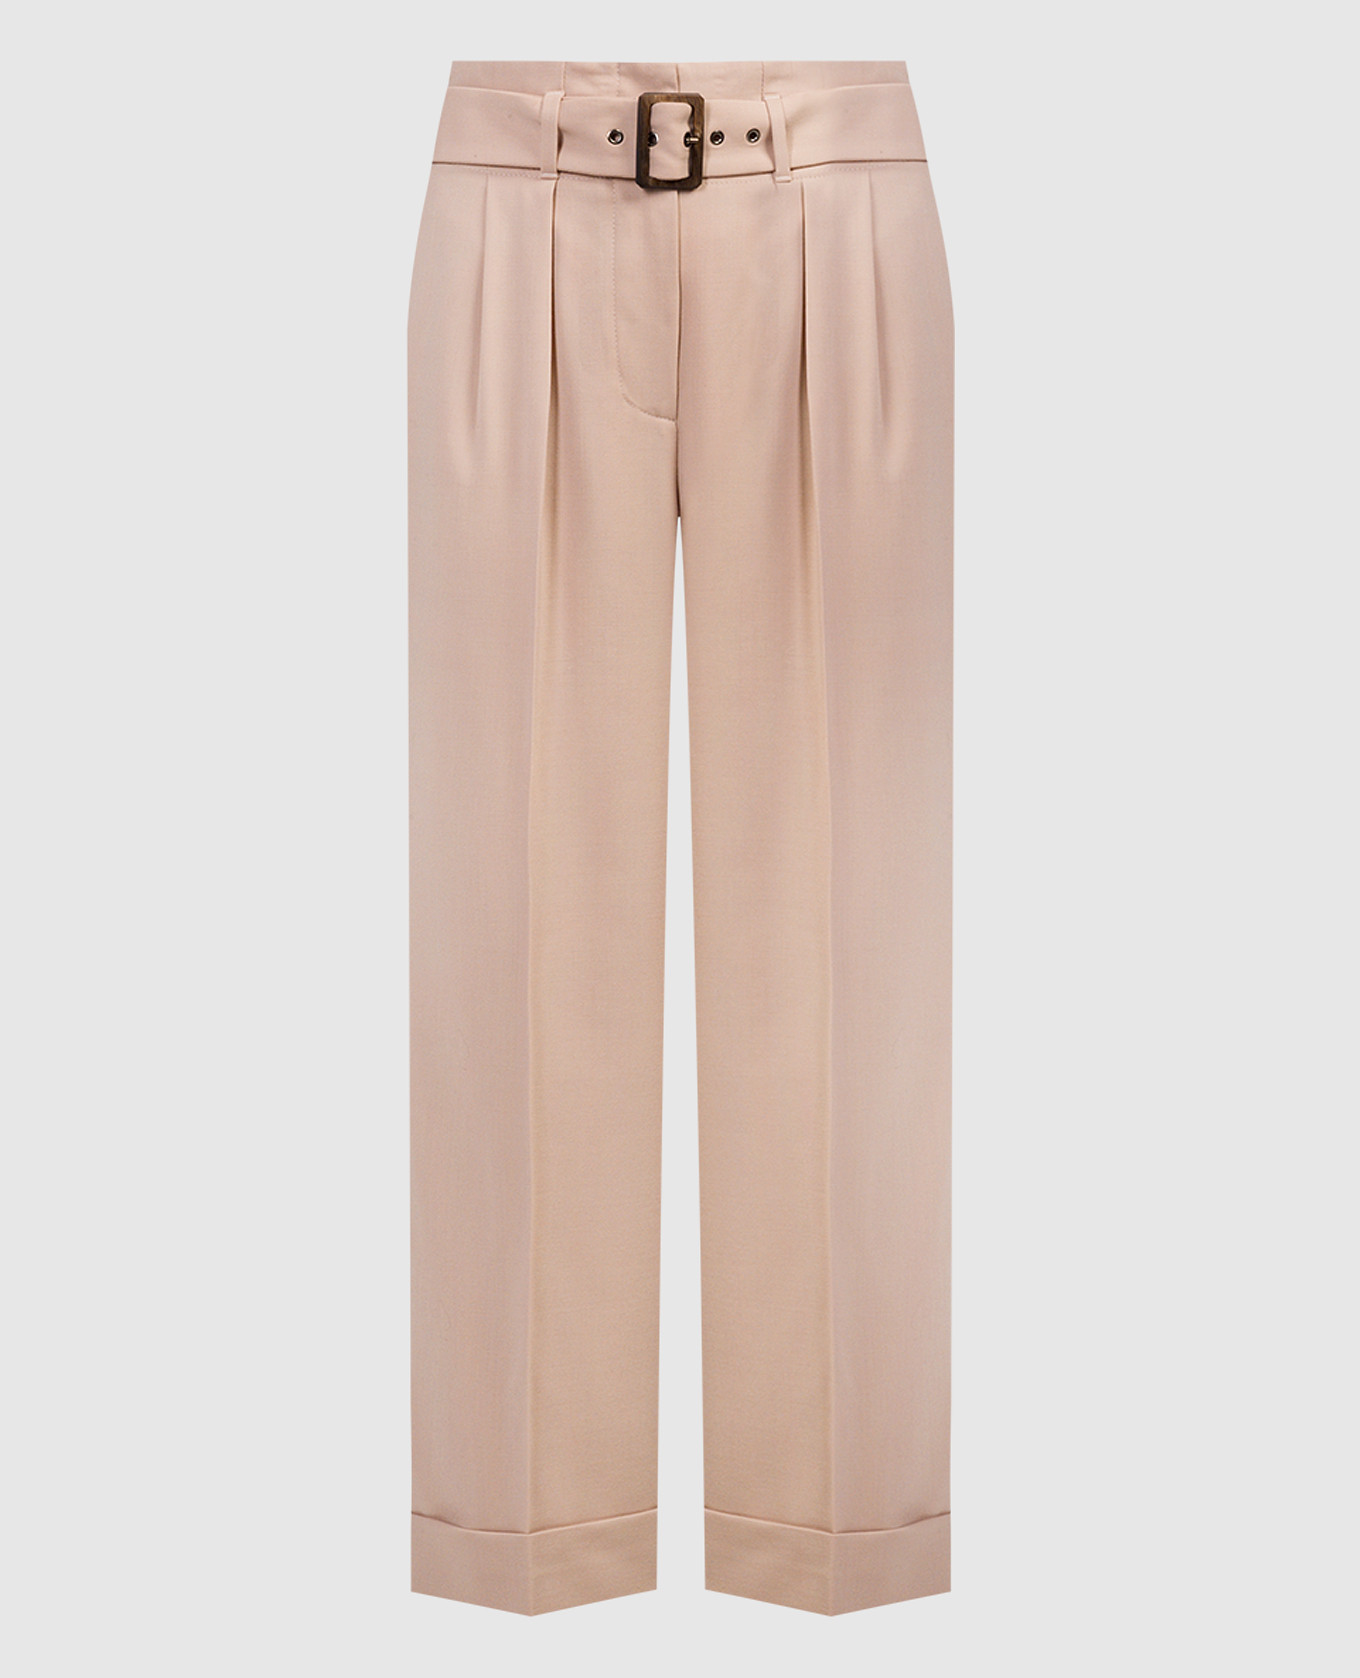 Beige trousers with a high fit